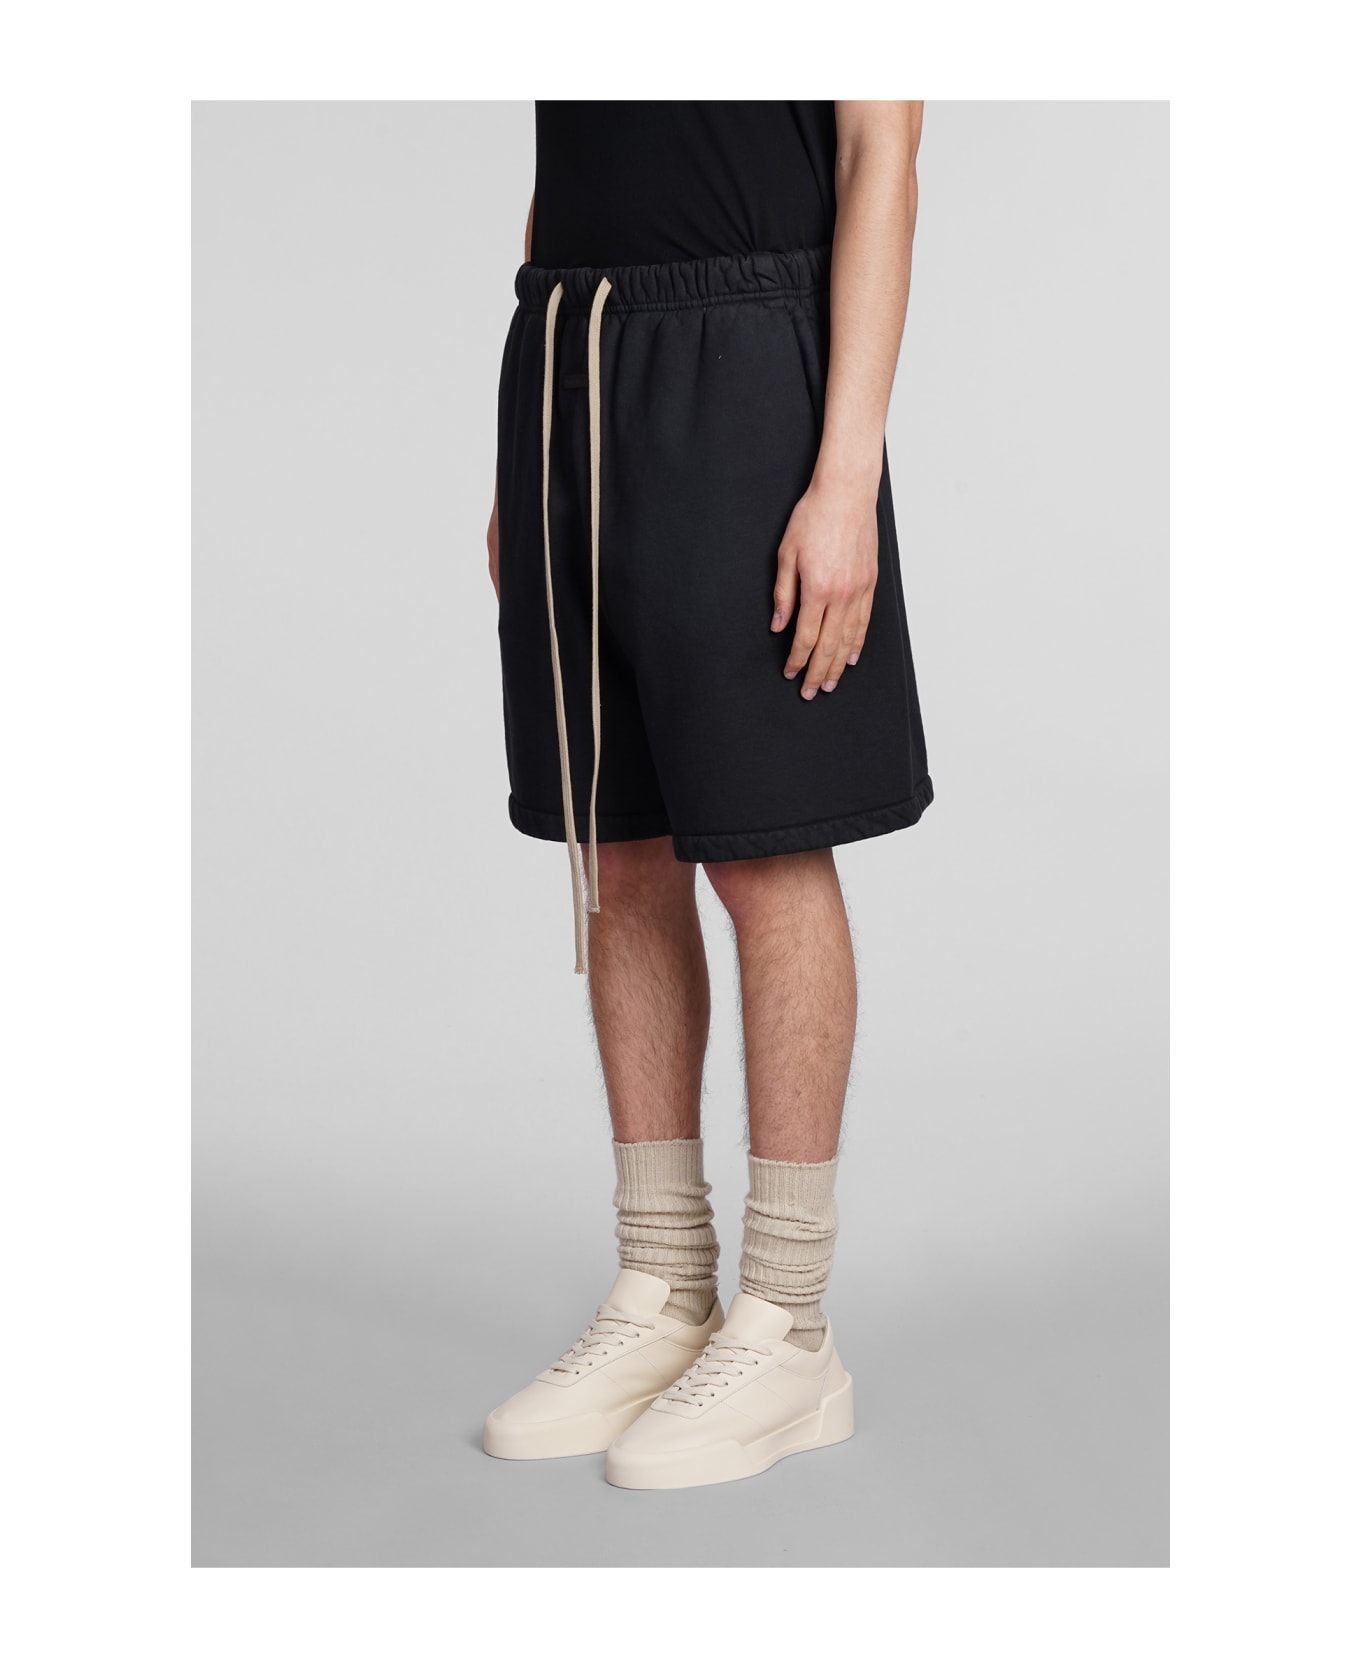 Fear of God Shorts In Black Cotton - black